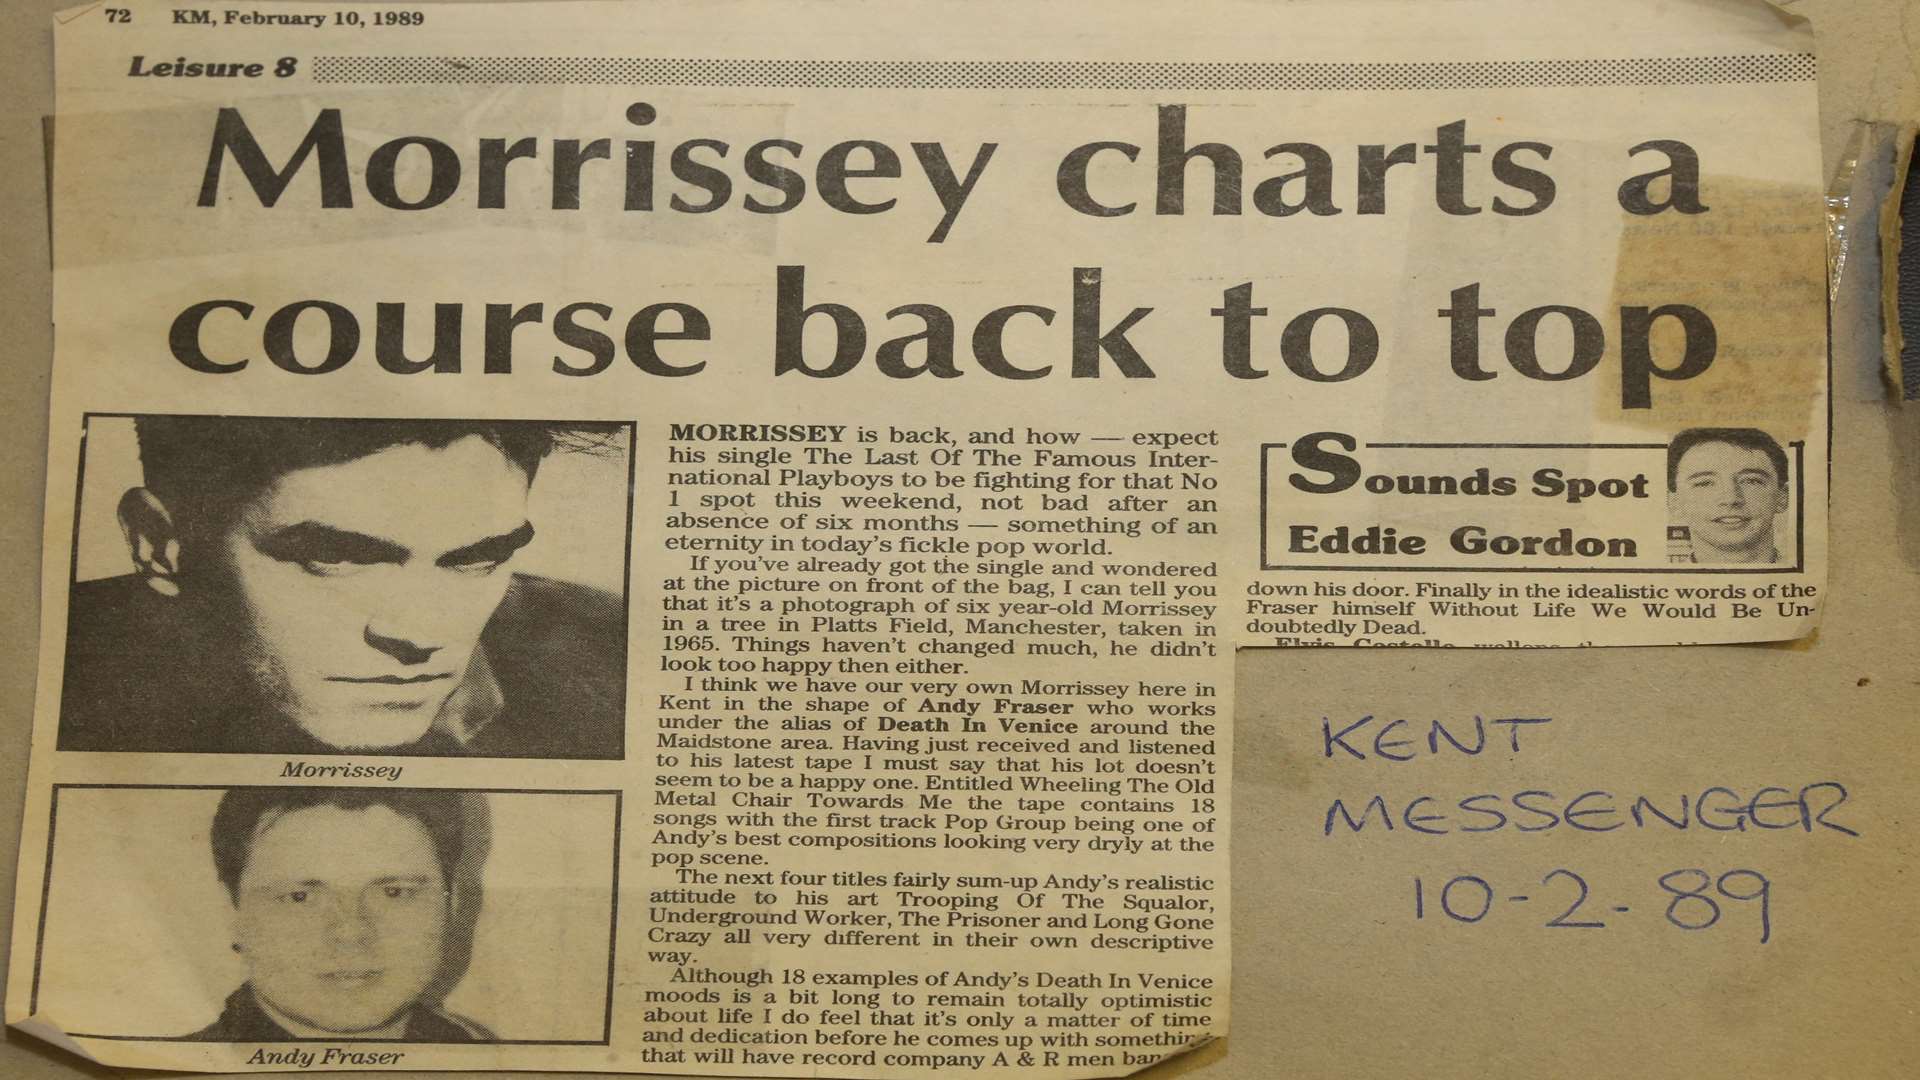 The newspaper article from 1989